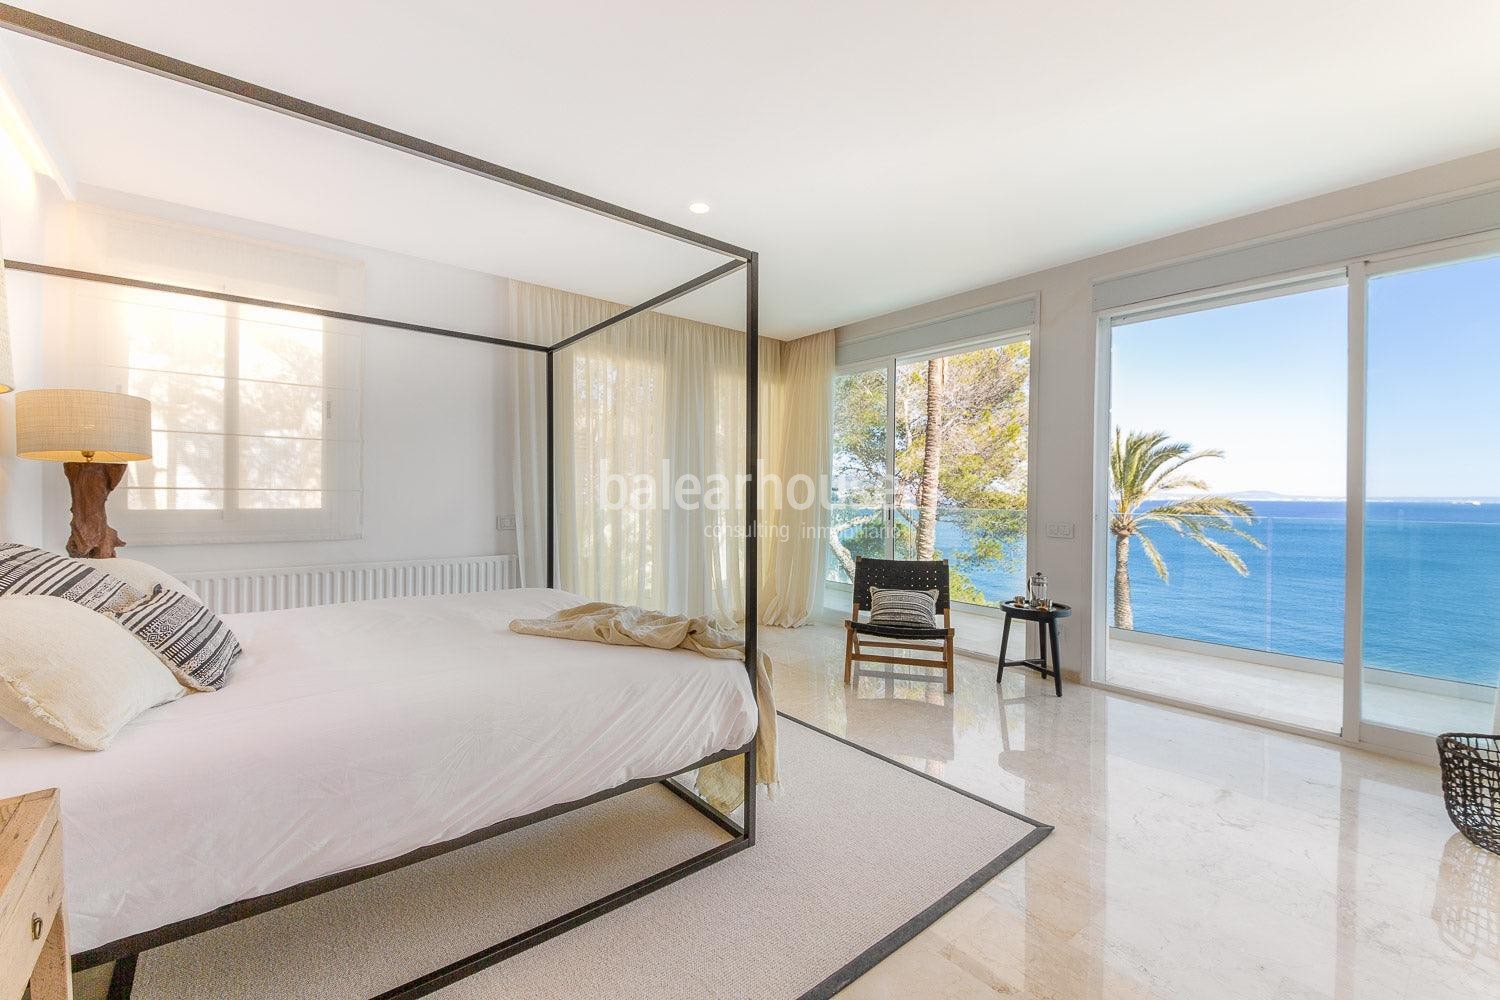 Large private villa for rent with spectacular sea views located on the first line in Cala Vinyes